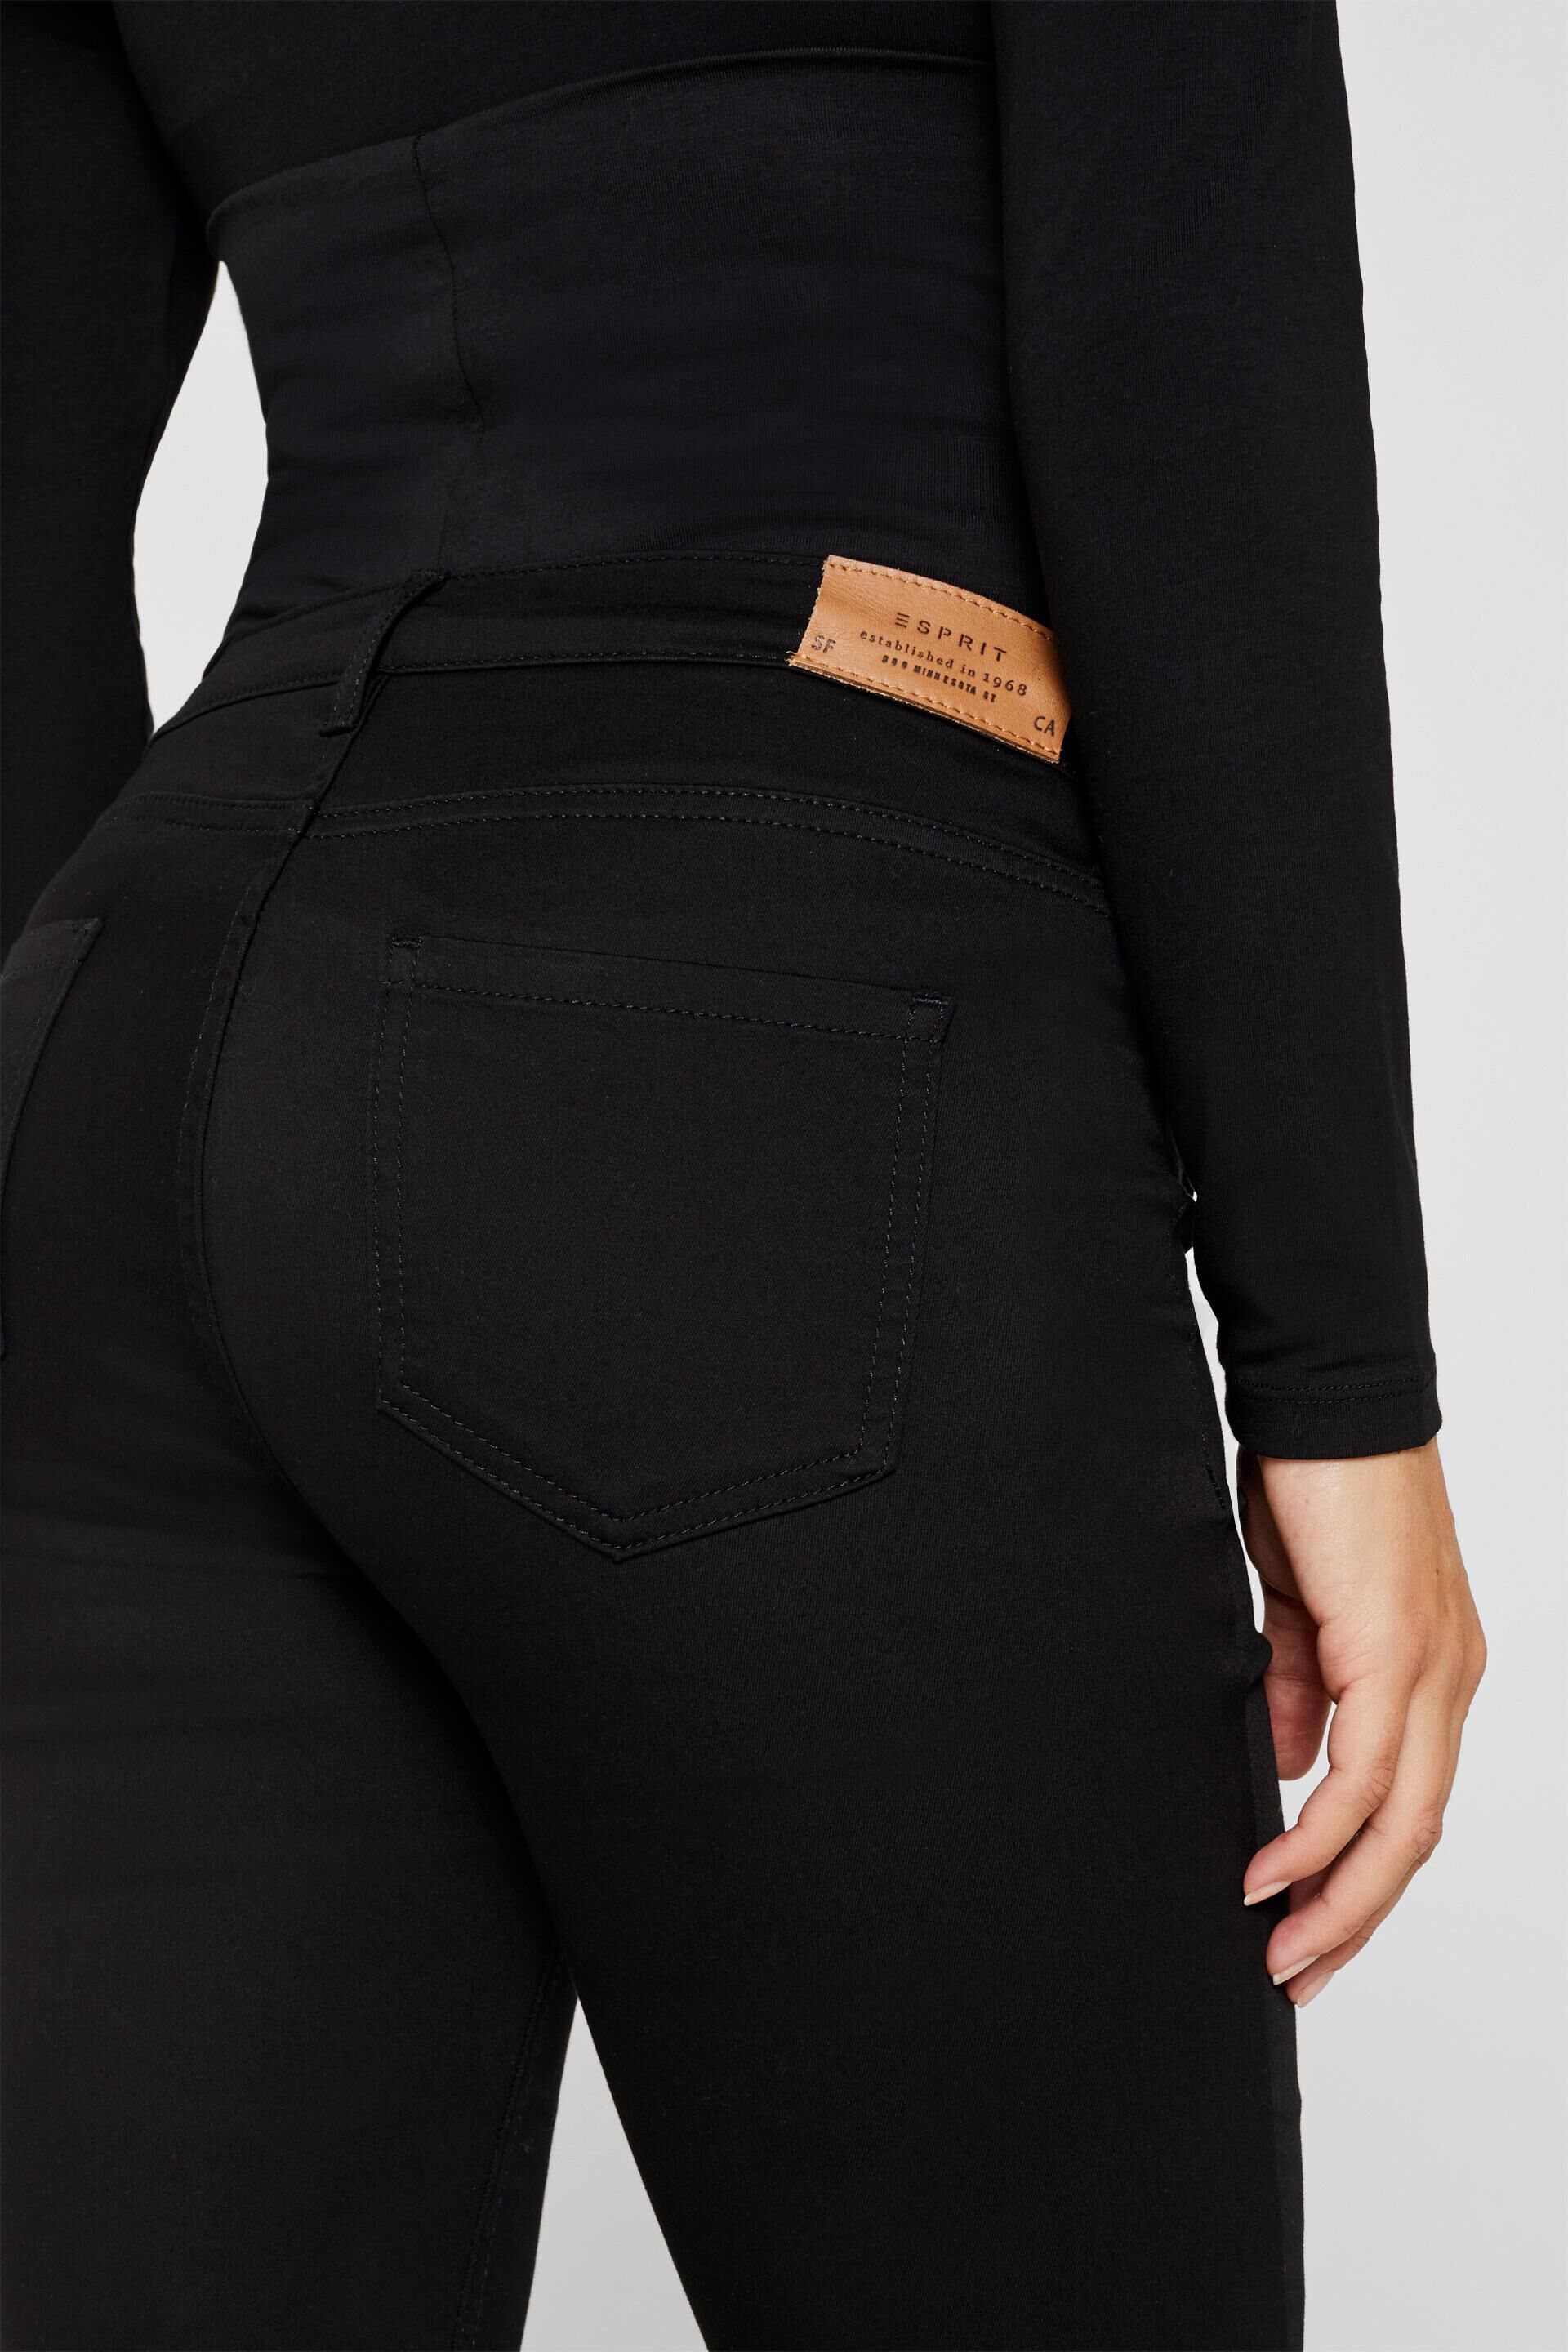 Esprit an Stretch waistband with over-bump trousers